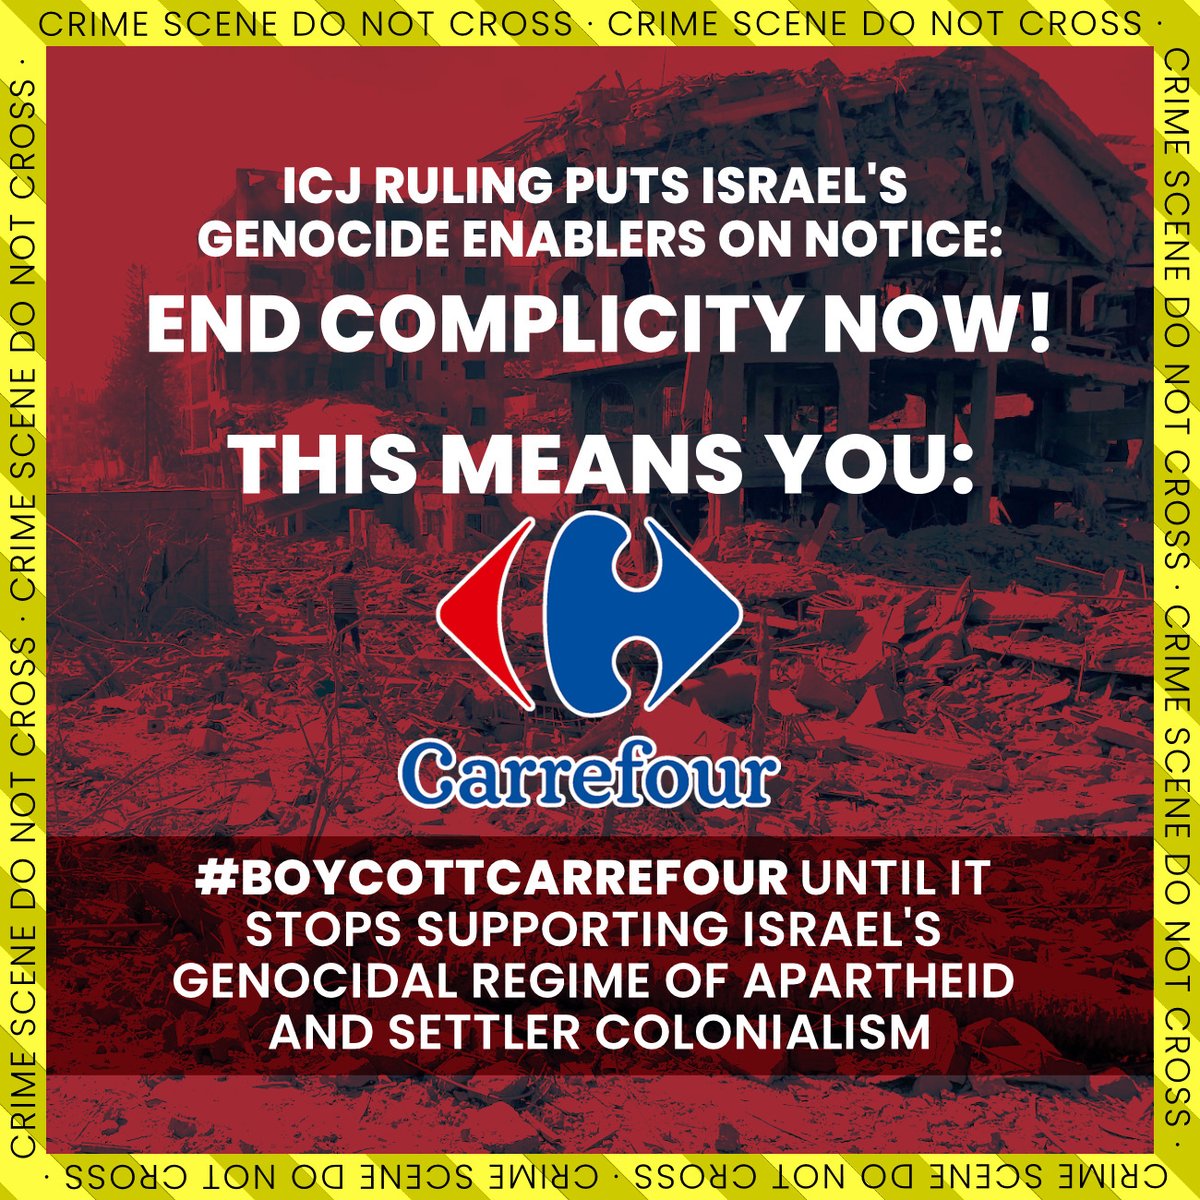 The ICJ has ruled that Israel is plausibly committing genocide. Israel can only maintain its regime through support from govs, institutions and companies like @CarrefourGroup. Carrefour profits from and enables Israel's #GazaGenocide. #BoycottCarrefour loom.ly/HNNCN7M